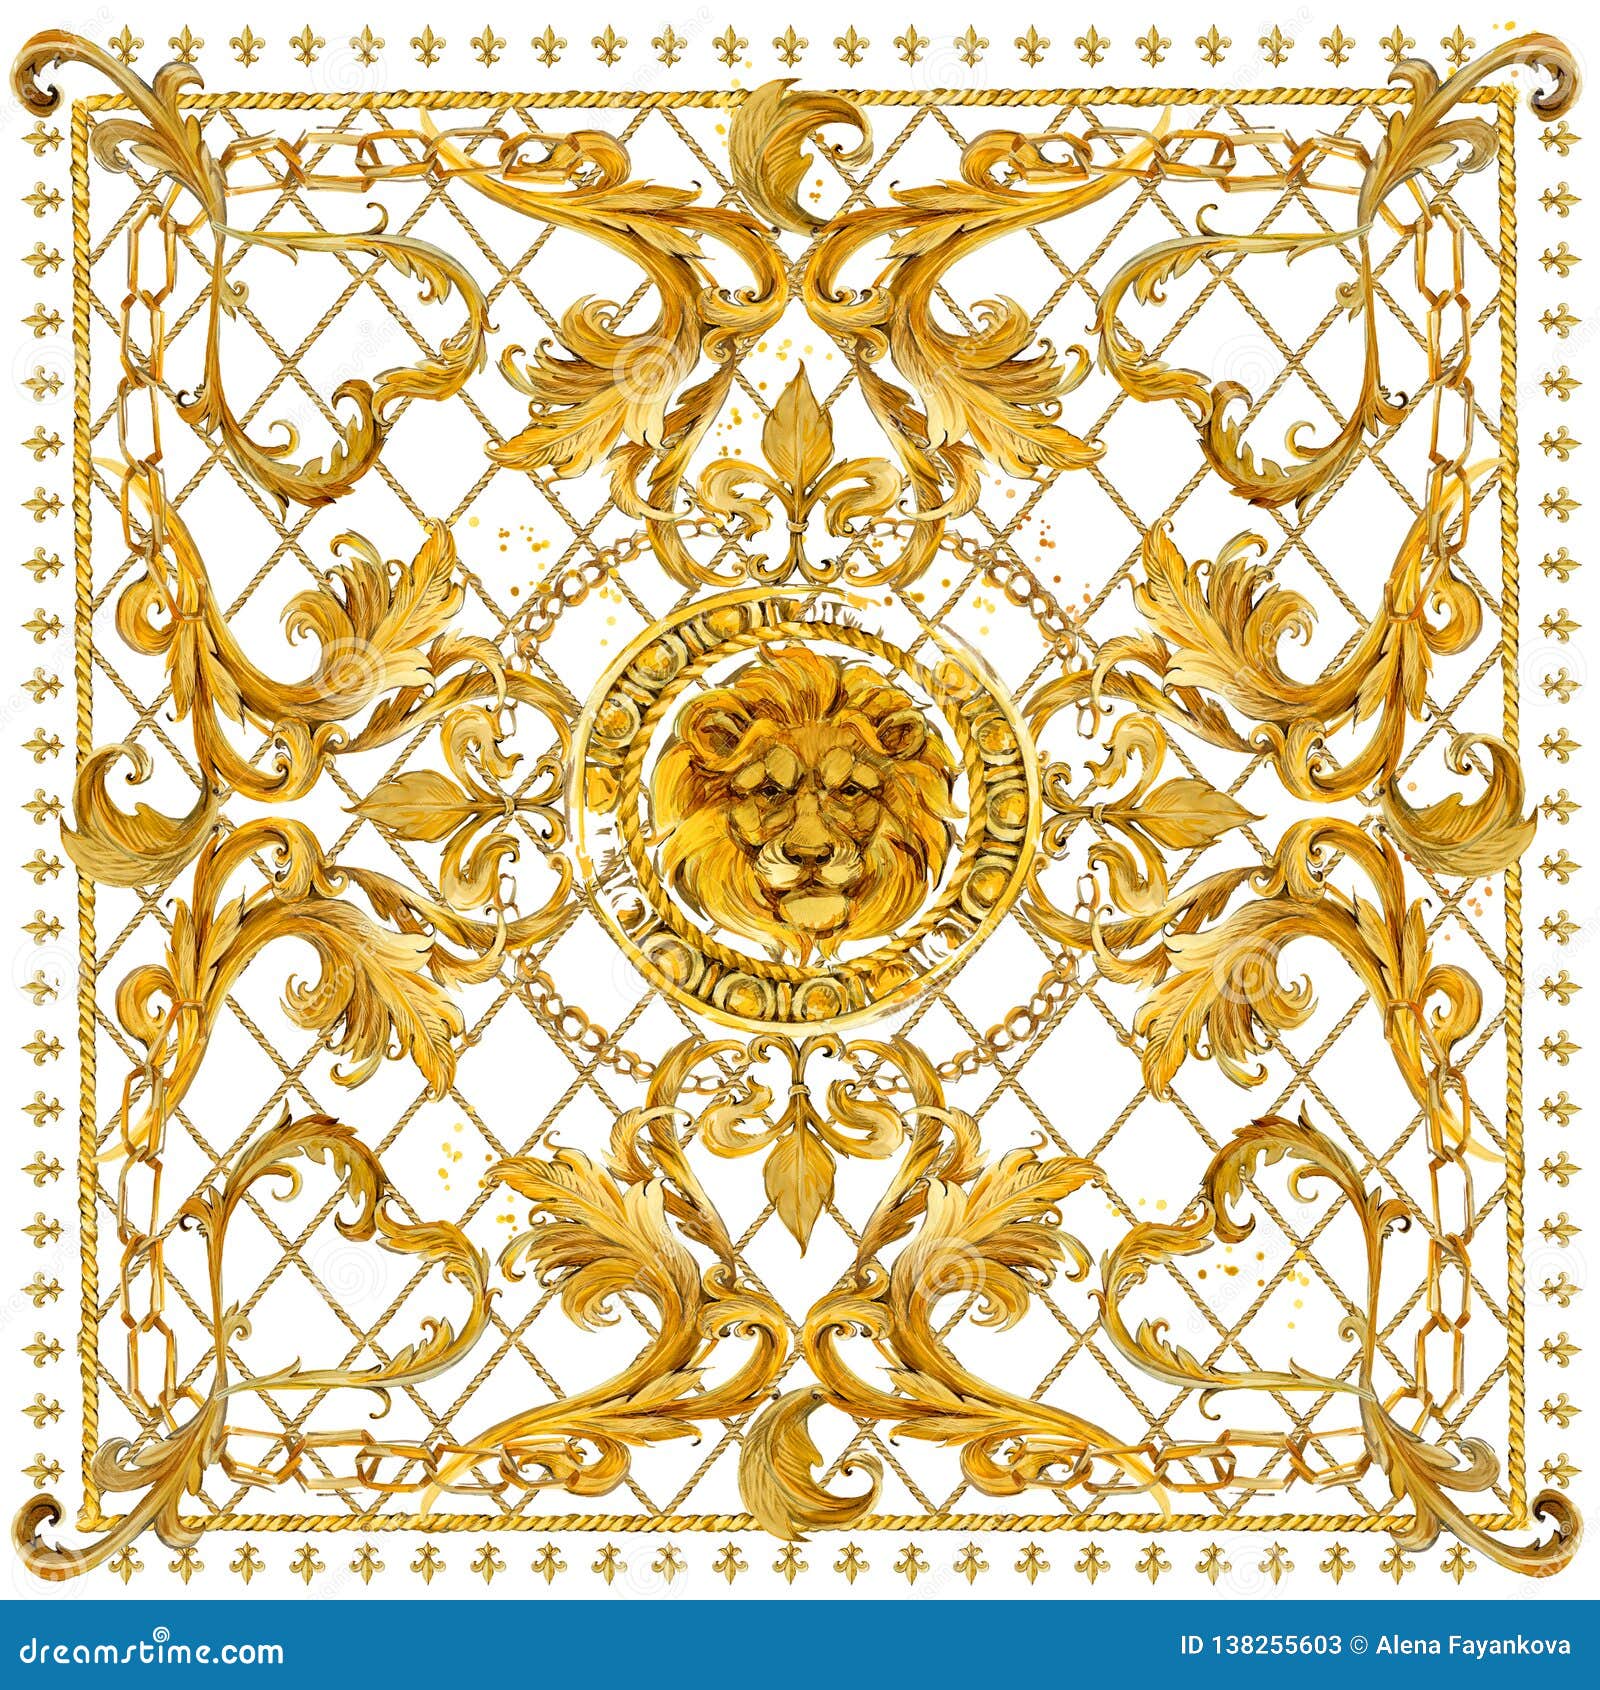 gold chains seamless border. luxury . golden lion head and lace. damask pattern . vintage riches background.